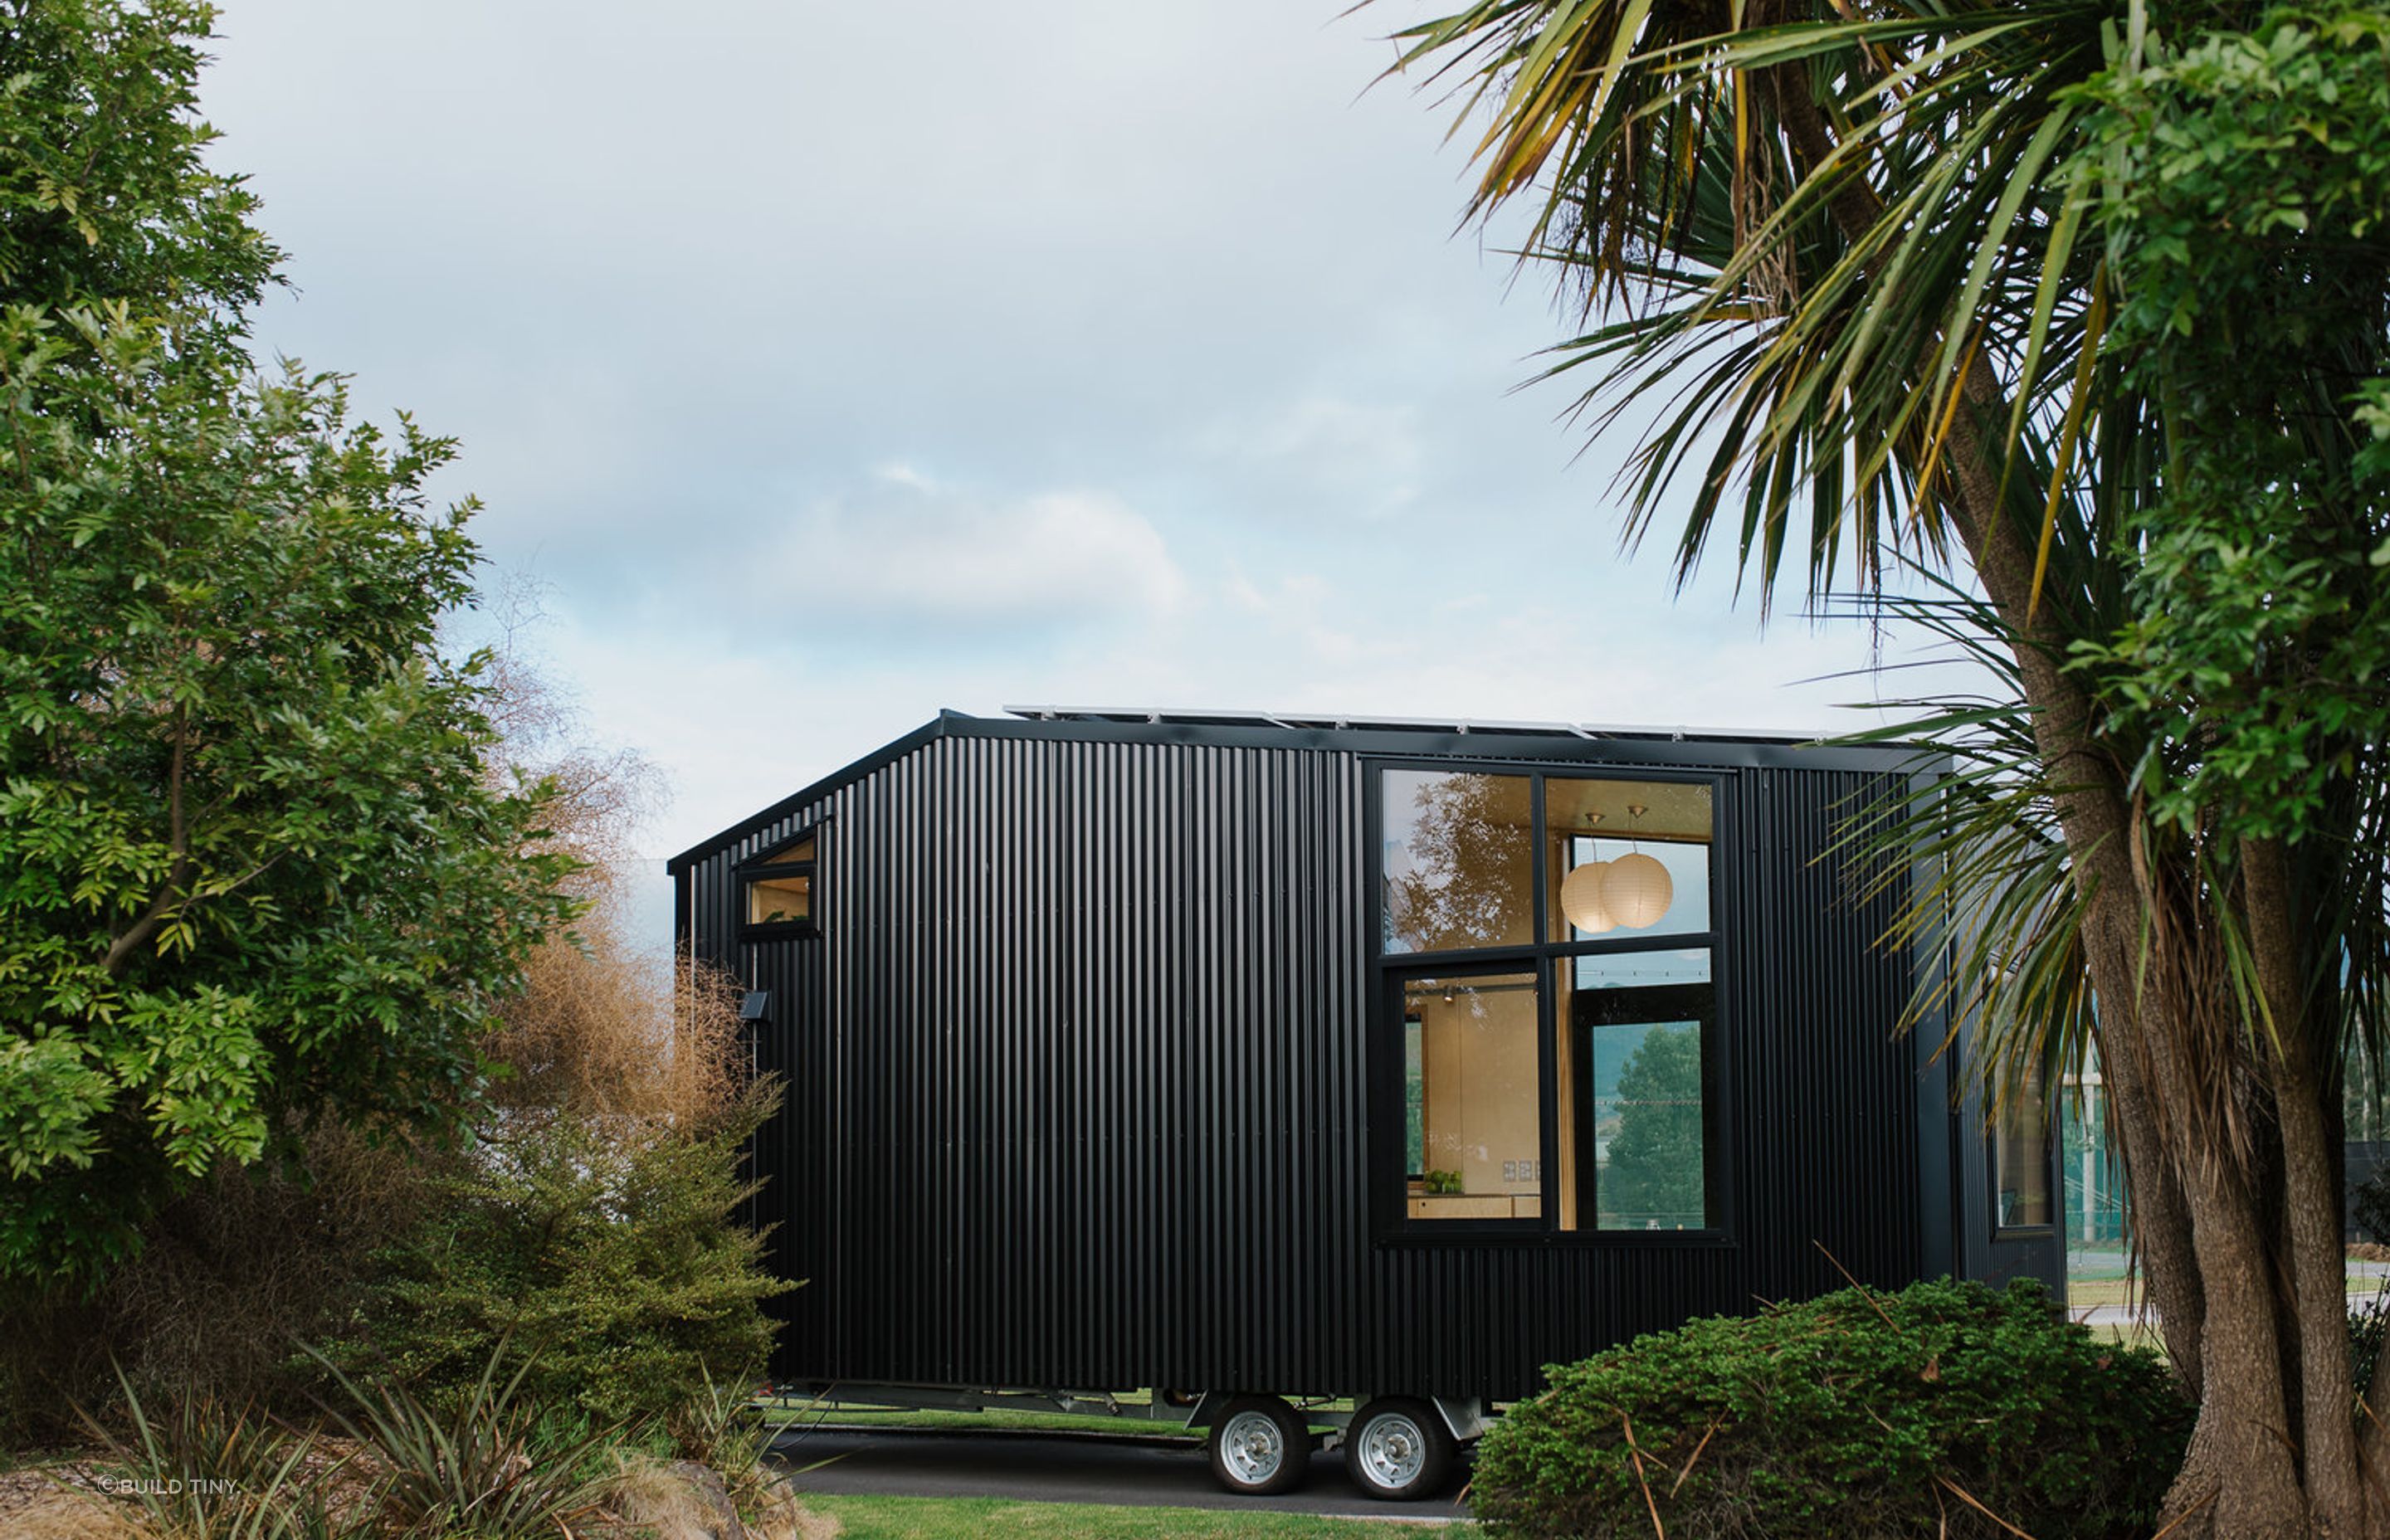 The other side of the Tiny Home features large windows so it can be positioned in either direction to maximise sunlight and views. Photography supplied by Build Tiny.